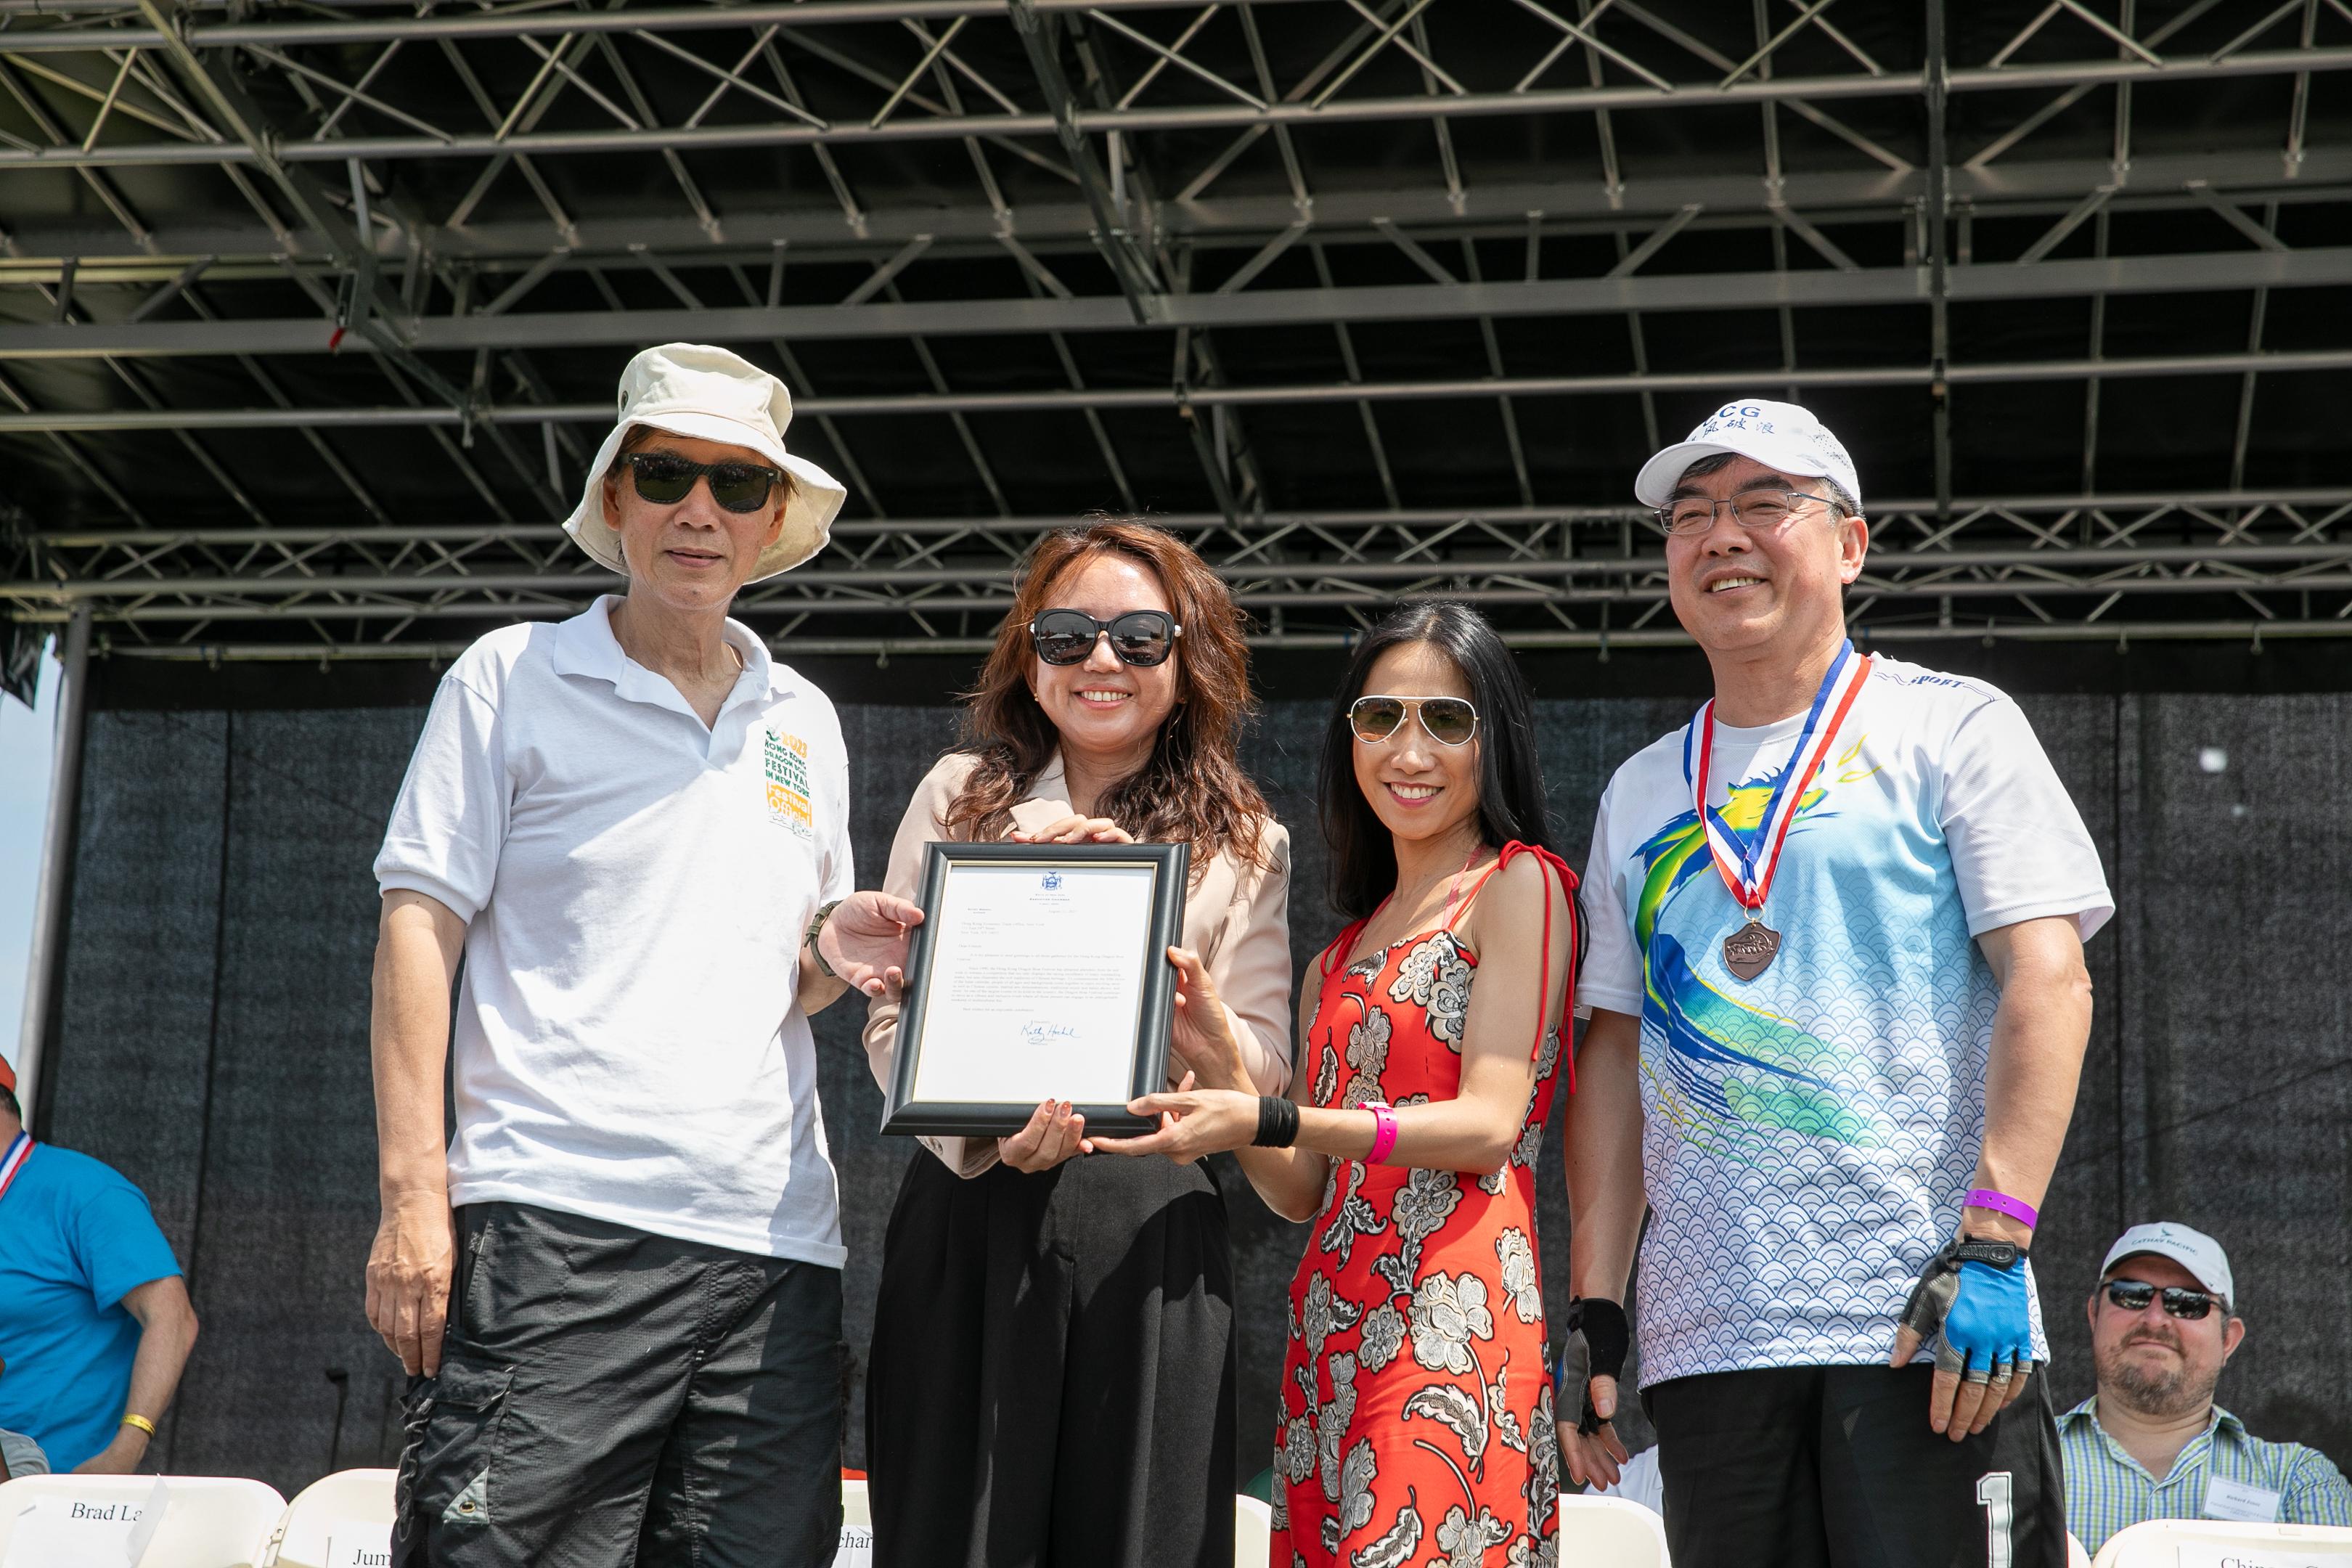 The 31st edition of the Hong Kong Dragon Boat Festival in New York was held at the Flushing Meadows Corona Park on August 12 and 13 (New York time). Photo shows the Director of Asian Affairs of New York State Governor's Executive Chamber, Ms Elaine Fan (second left), presents a proclamation on behalf of the Governor of New York State, Ms Kathy Hochul, to the Director of Hong Kong Economic and Trade Office in New York, Ms Candy Nip (second right). Also pictured are the Chairman of the Hong Kong Dragon Boat Festival in New York Inc., Mr Henry Wan (first left), and the Consul General of the People's Republic of China in New York, Mr Huang Ping (first right).